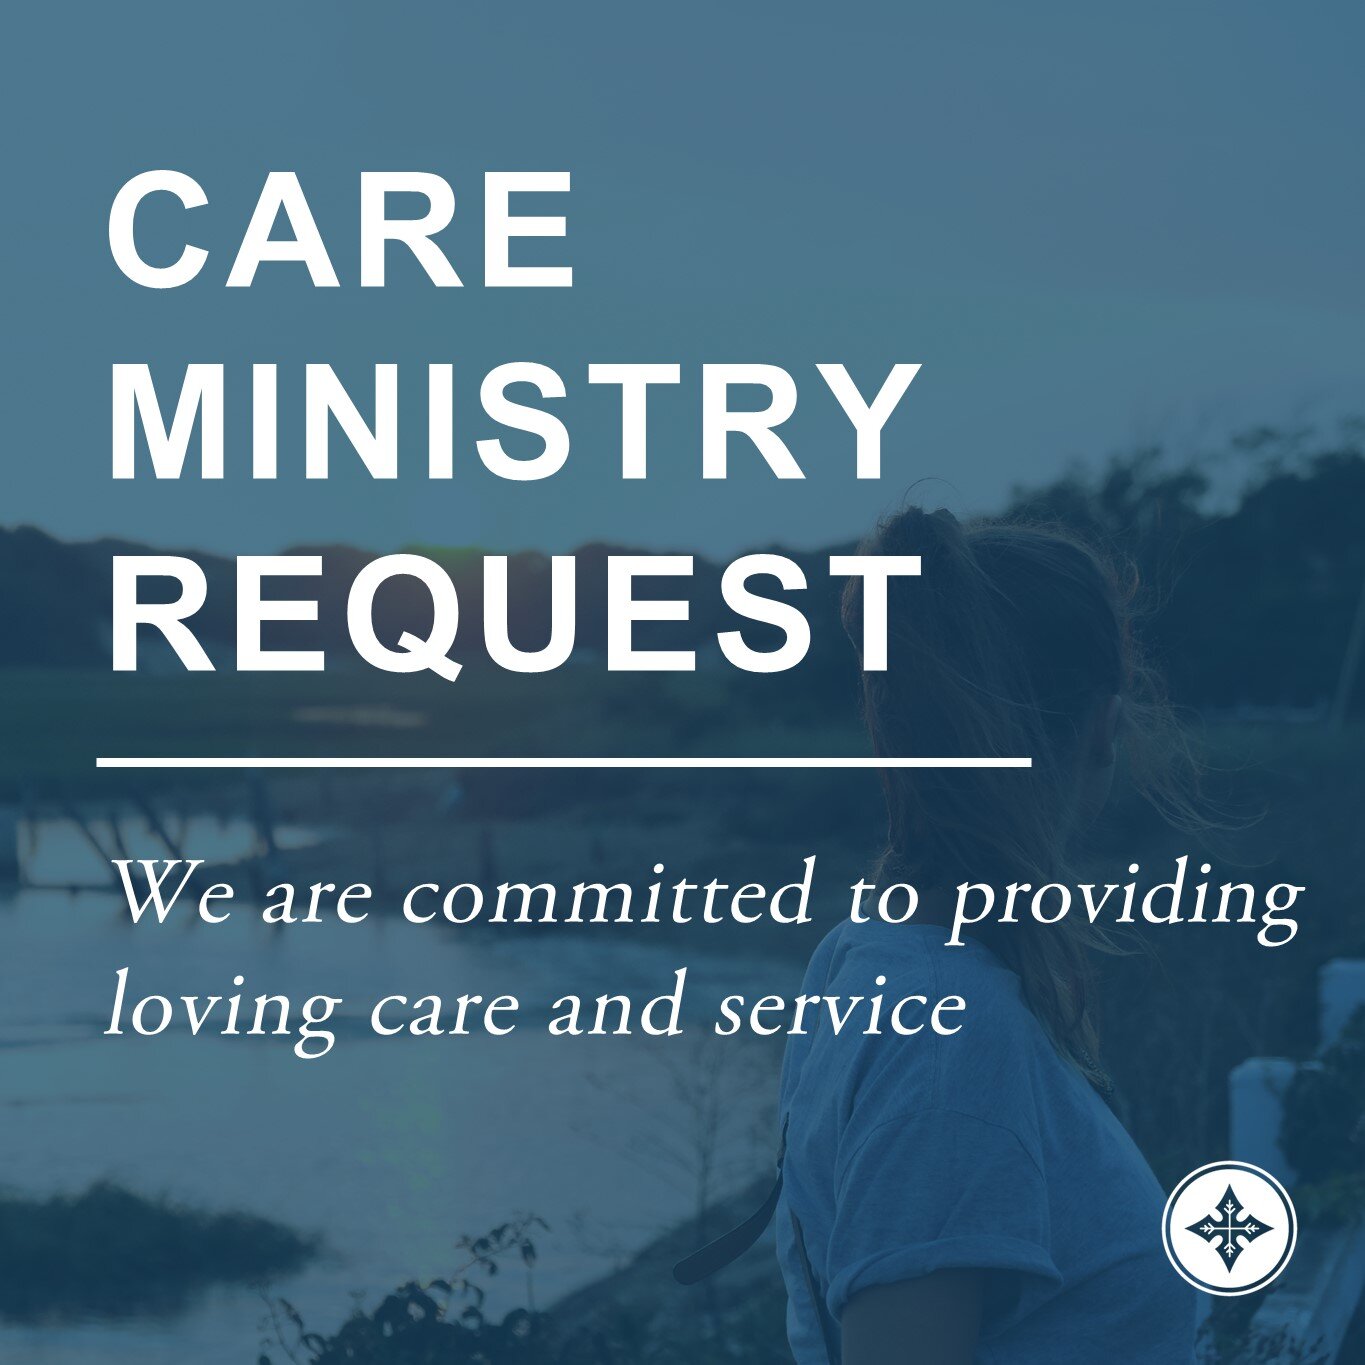 Care Ministry Request.jpg